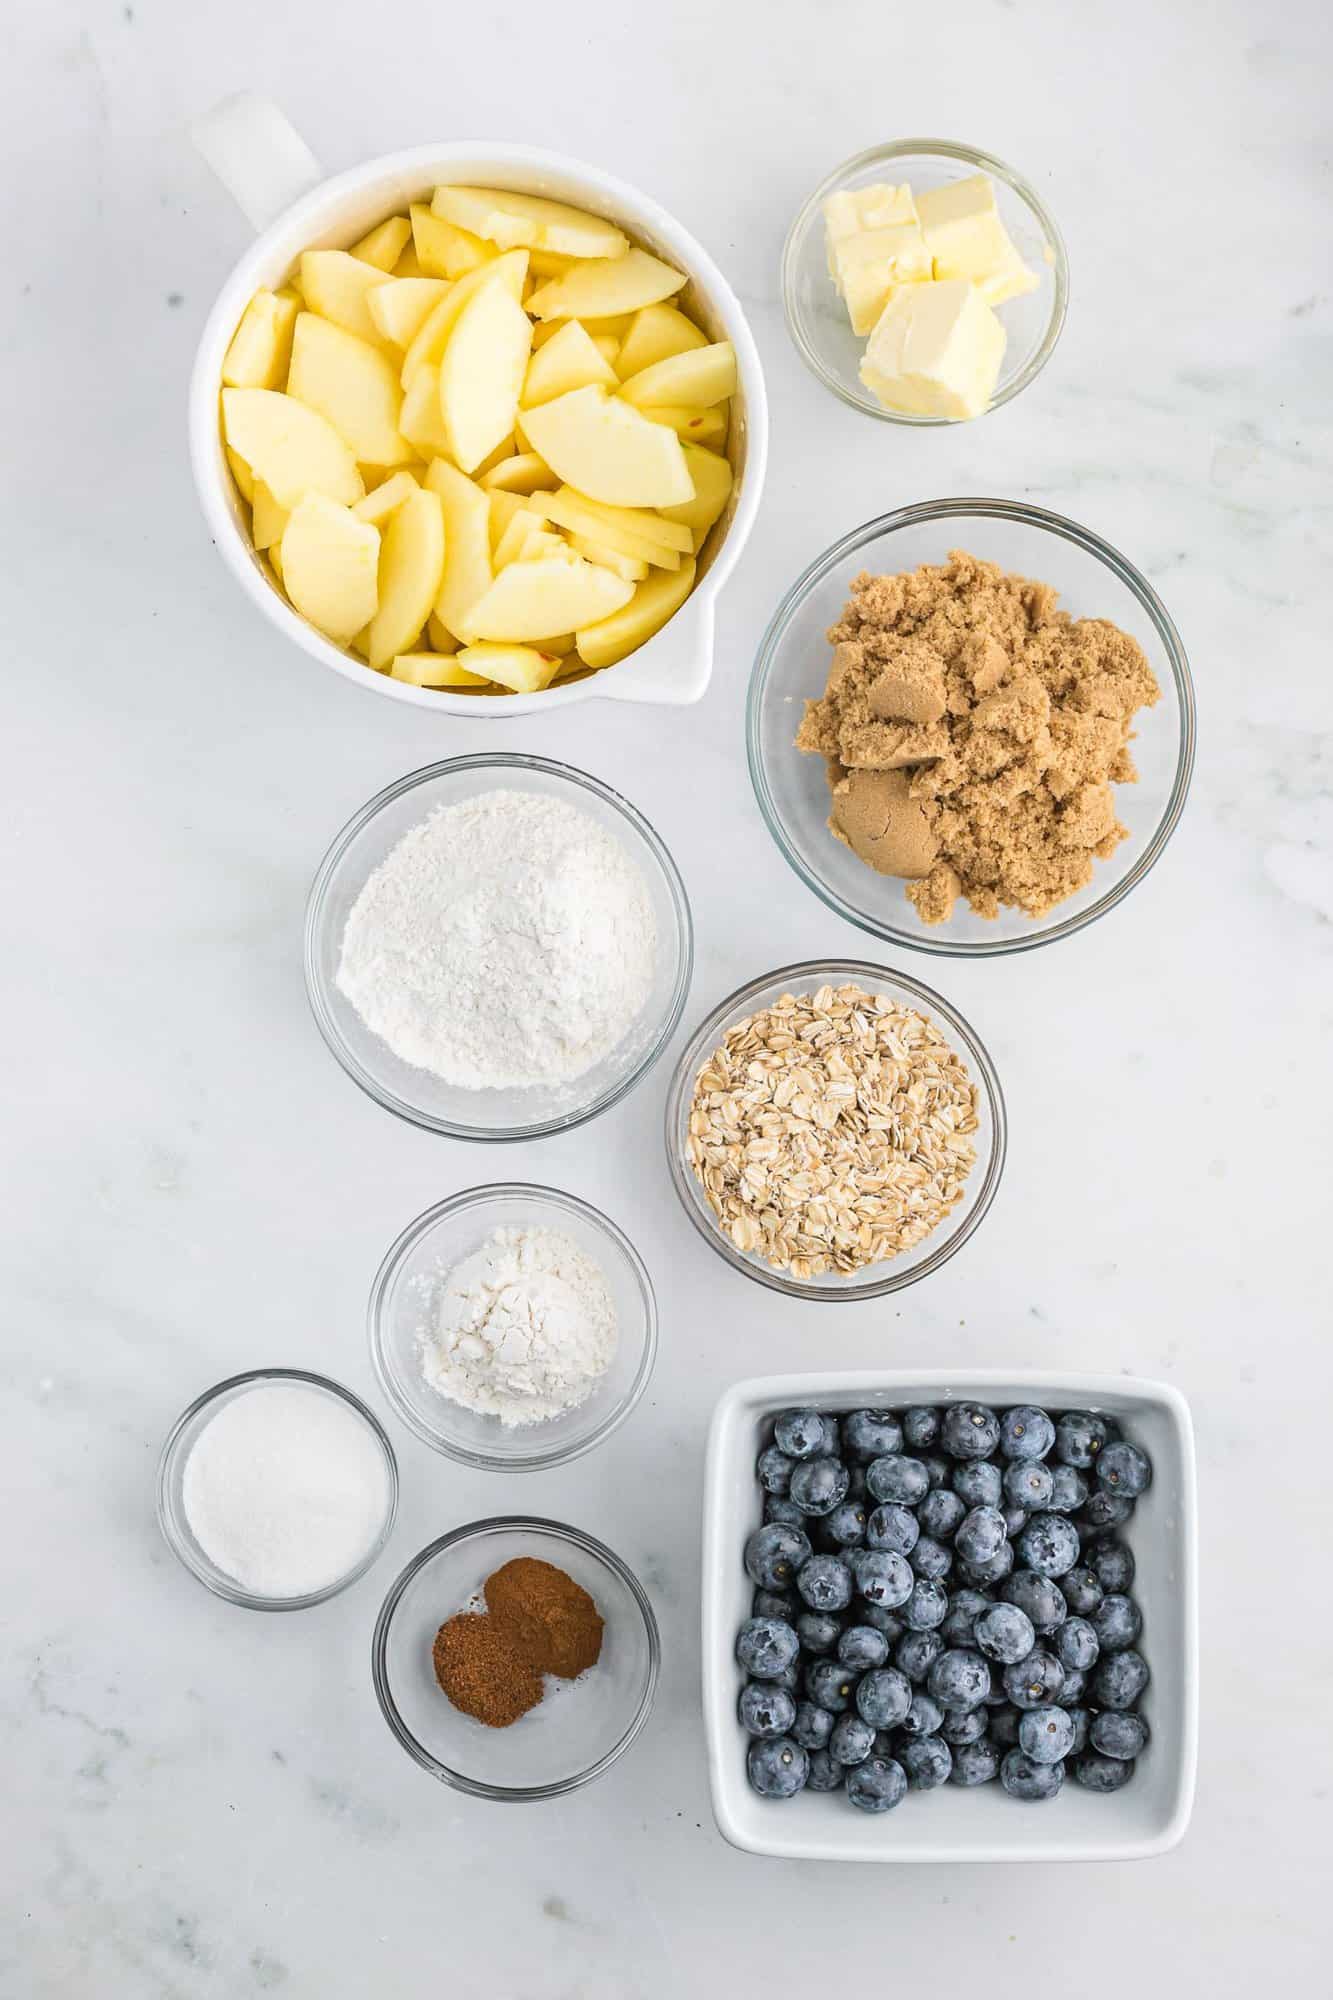 Ingredients needed in separate bowls, including apples and blueberries.